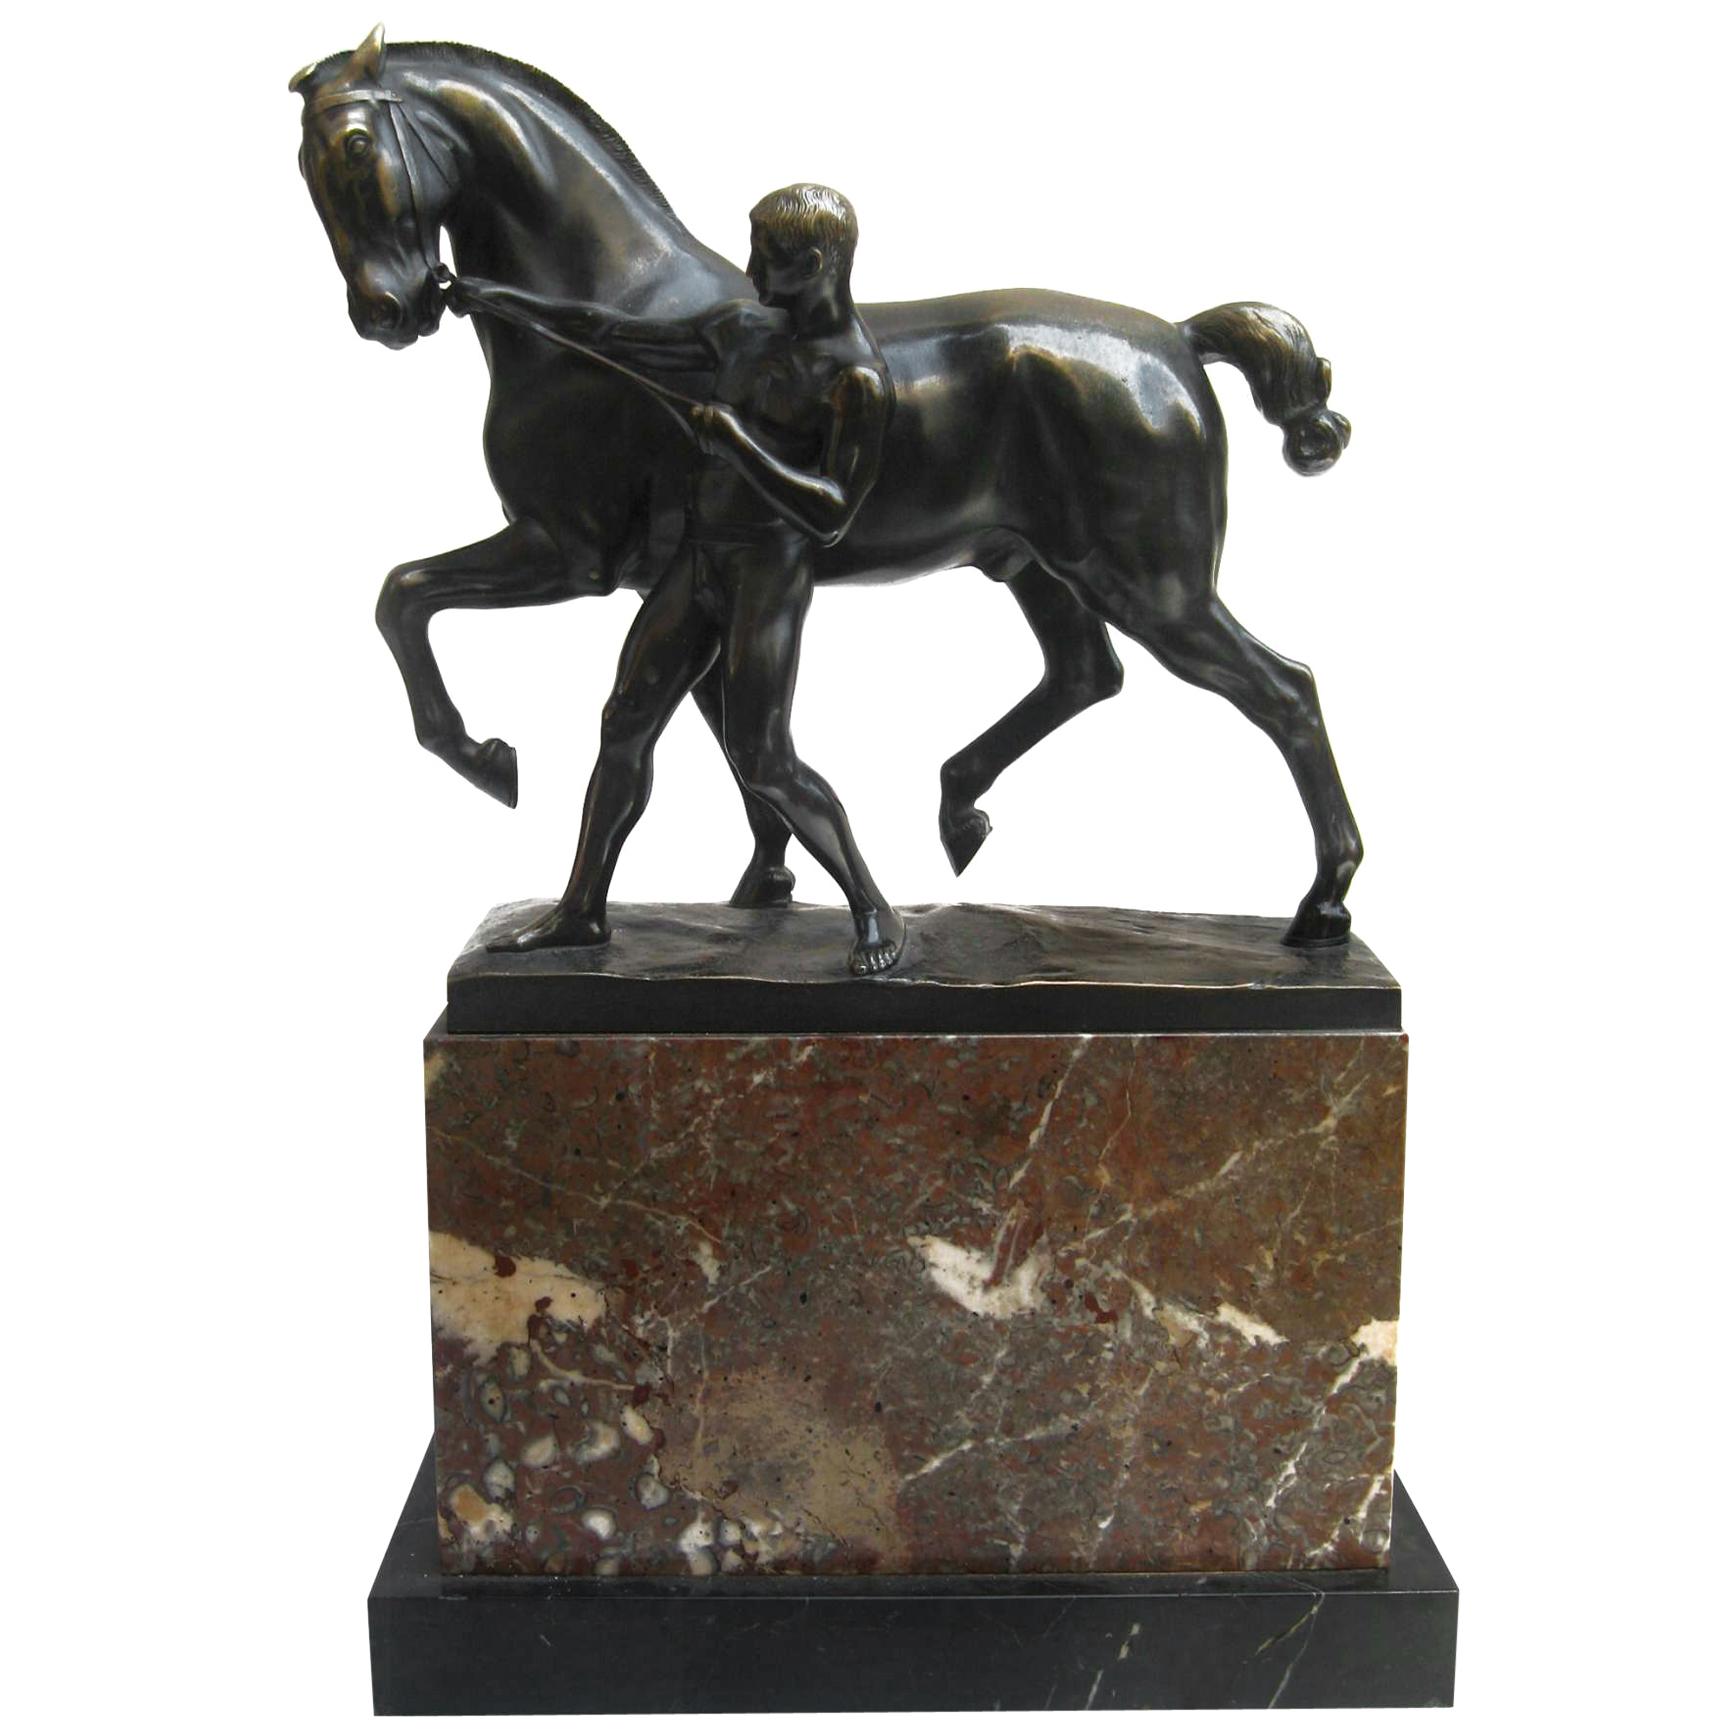 Bronze and Marble Sculpture of a Man Pulling the Reigns of a Horse